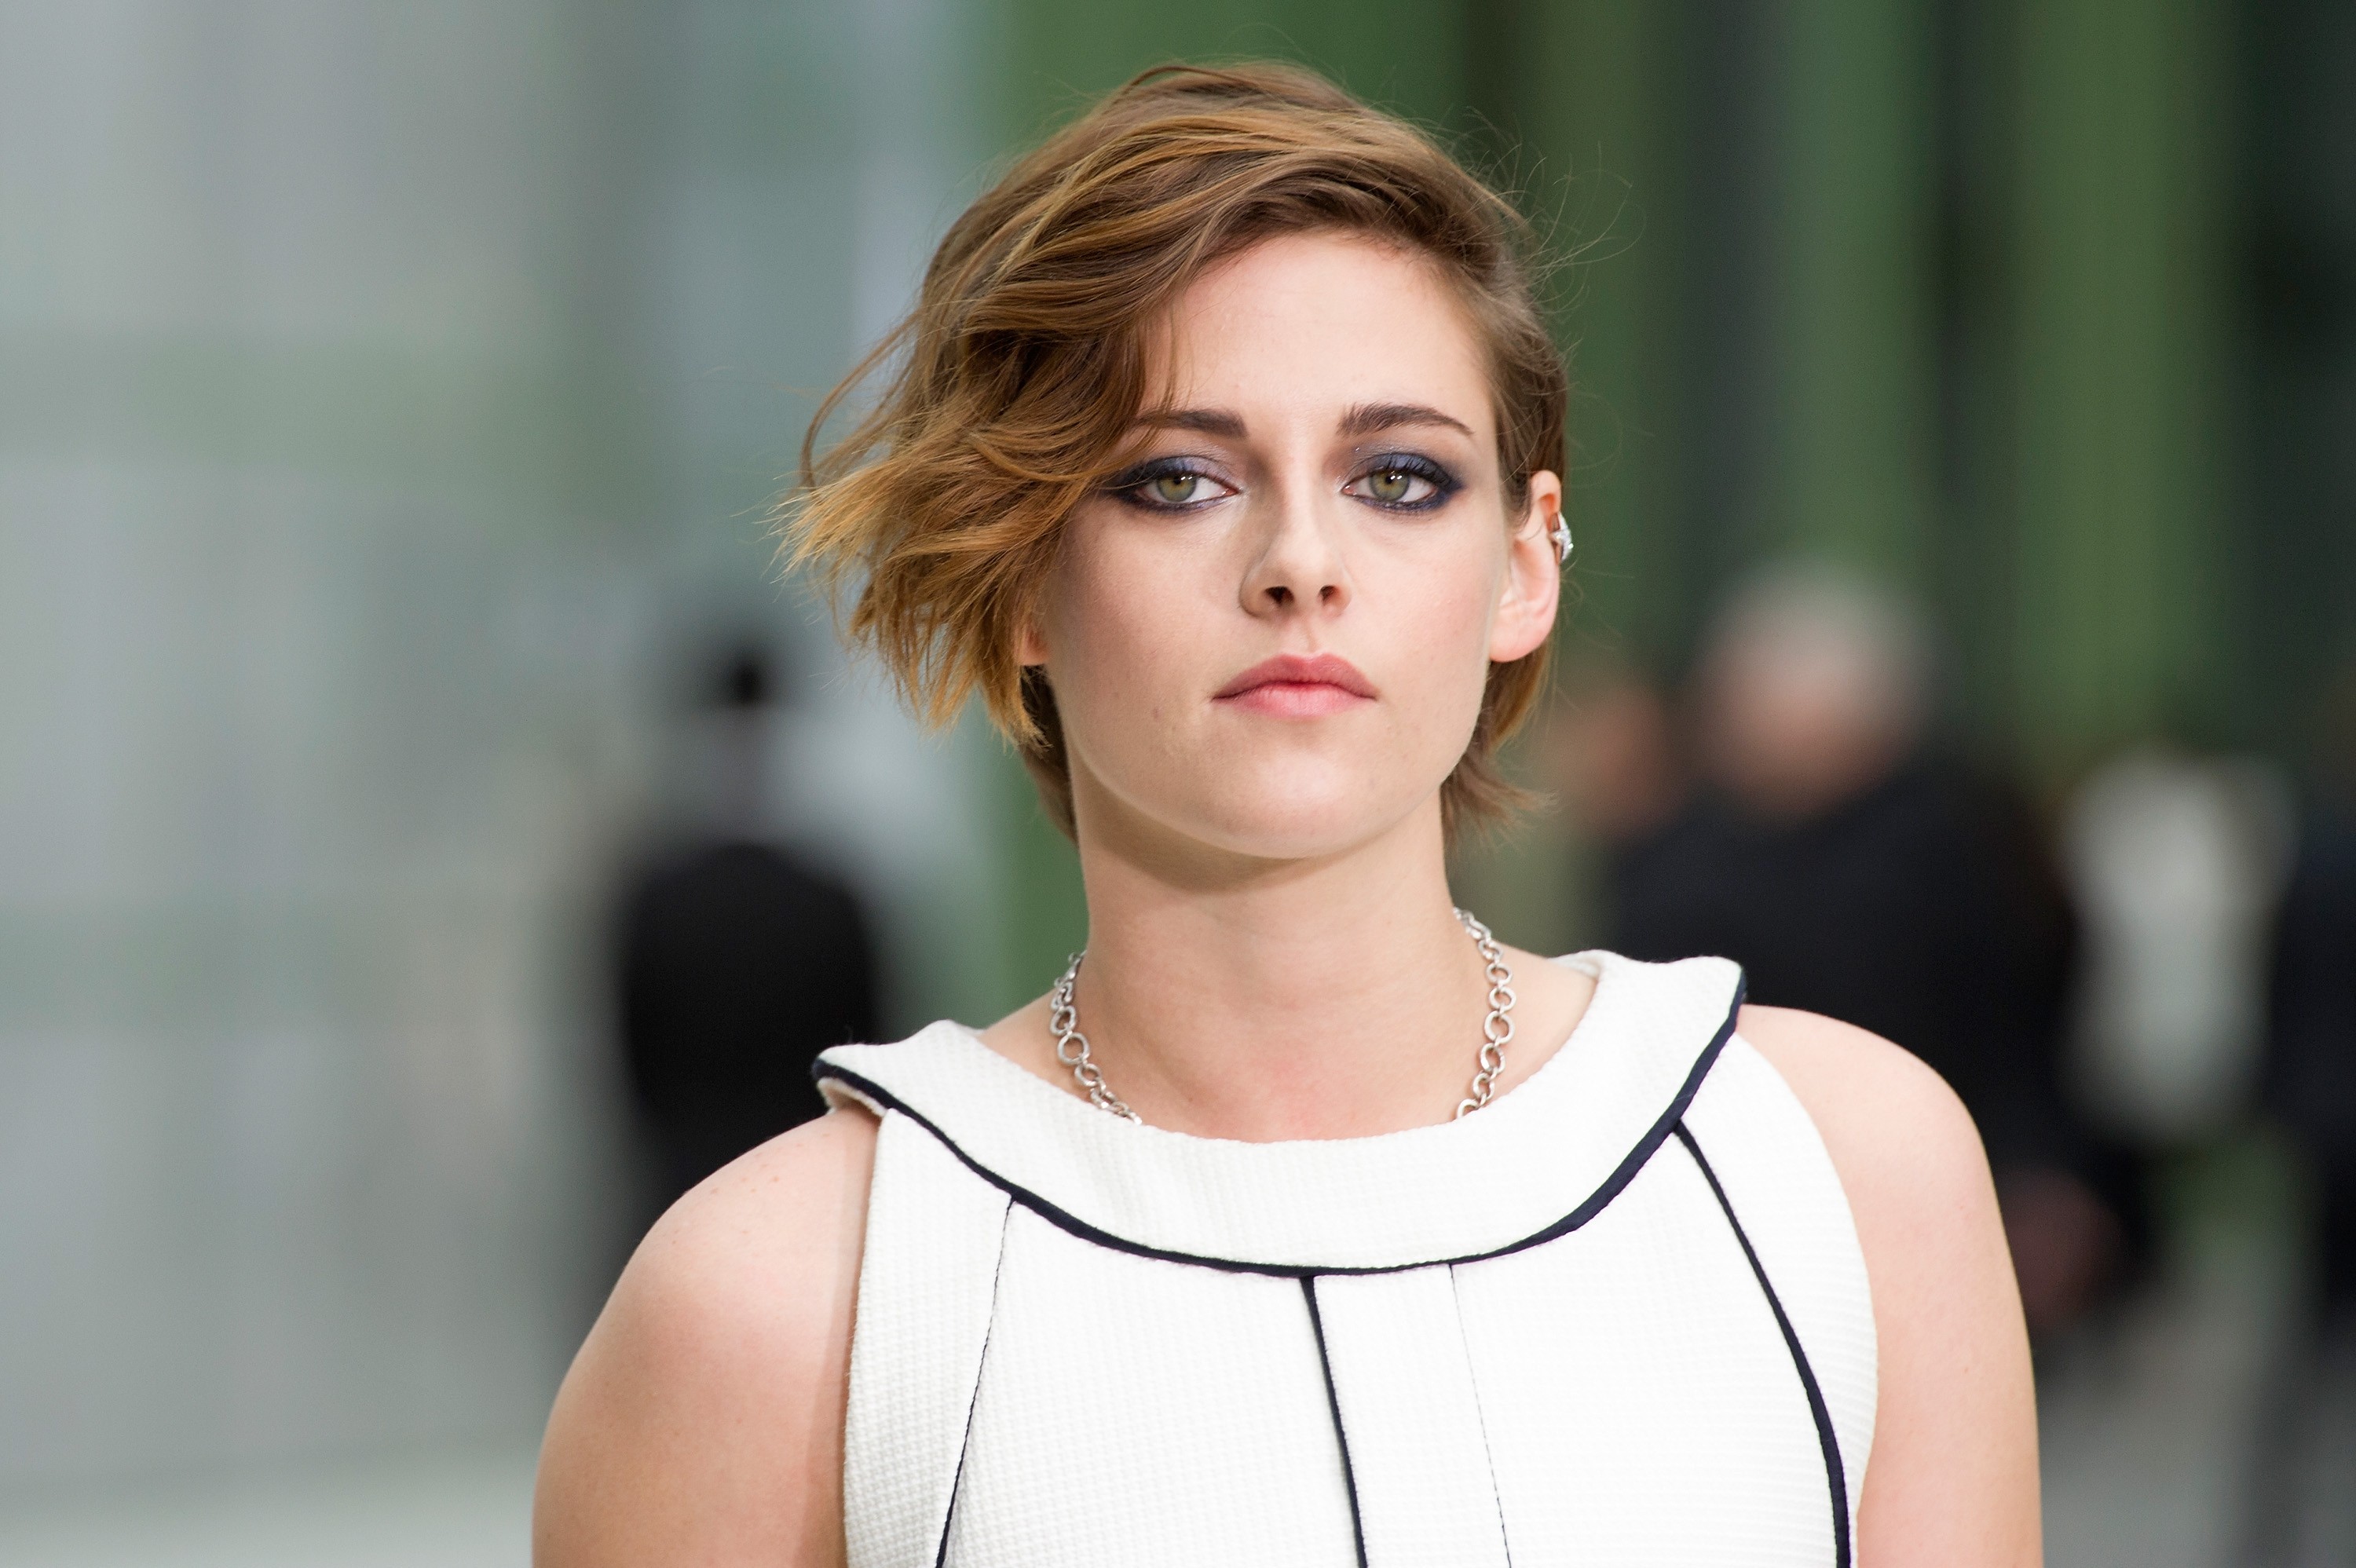 PARIS, FRANCE - JANUARY 27:  Kristen Stewart attends the Chanel show as part of Paris Fashion Week Haute Couture Spring/Summer 2015 at the Grand Palais on January 27, 2015 in Paris, France.  (Photo by Kristy Sparow/Getty Images) (Foto: Getty Images)